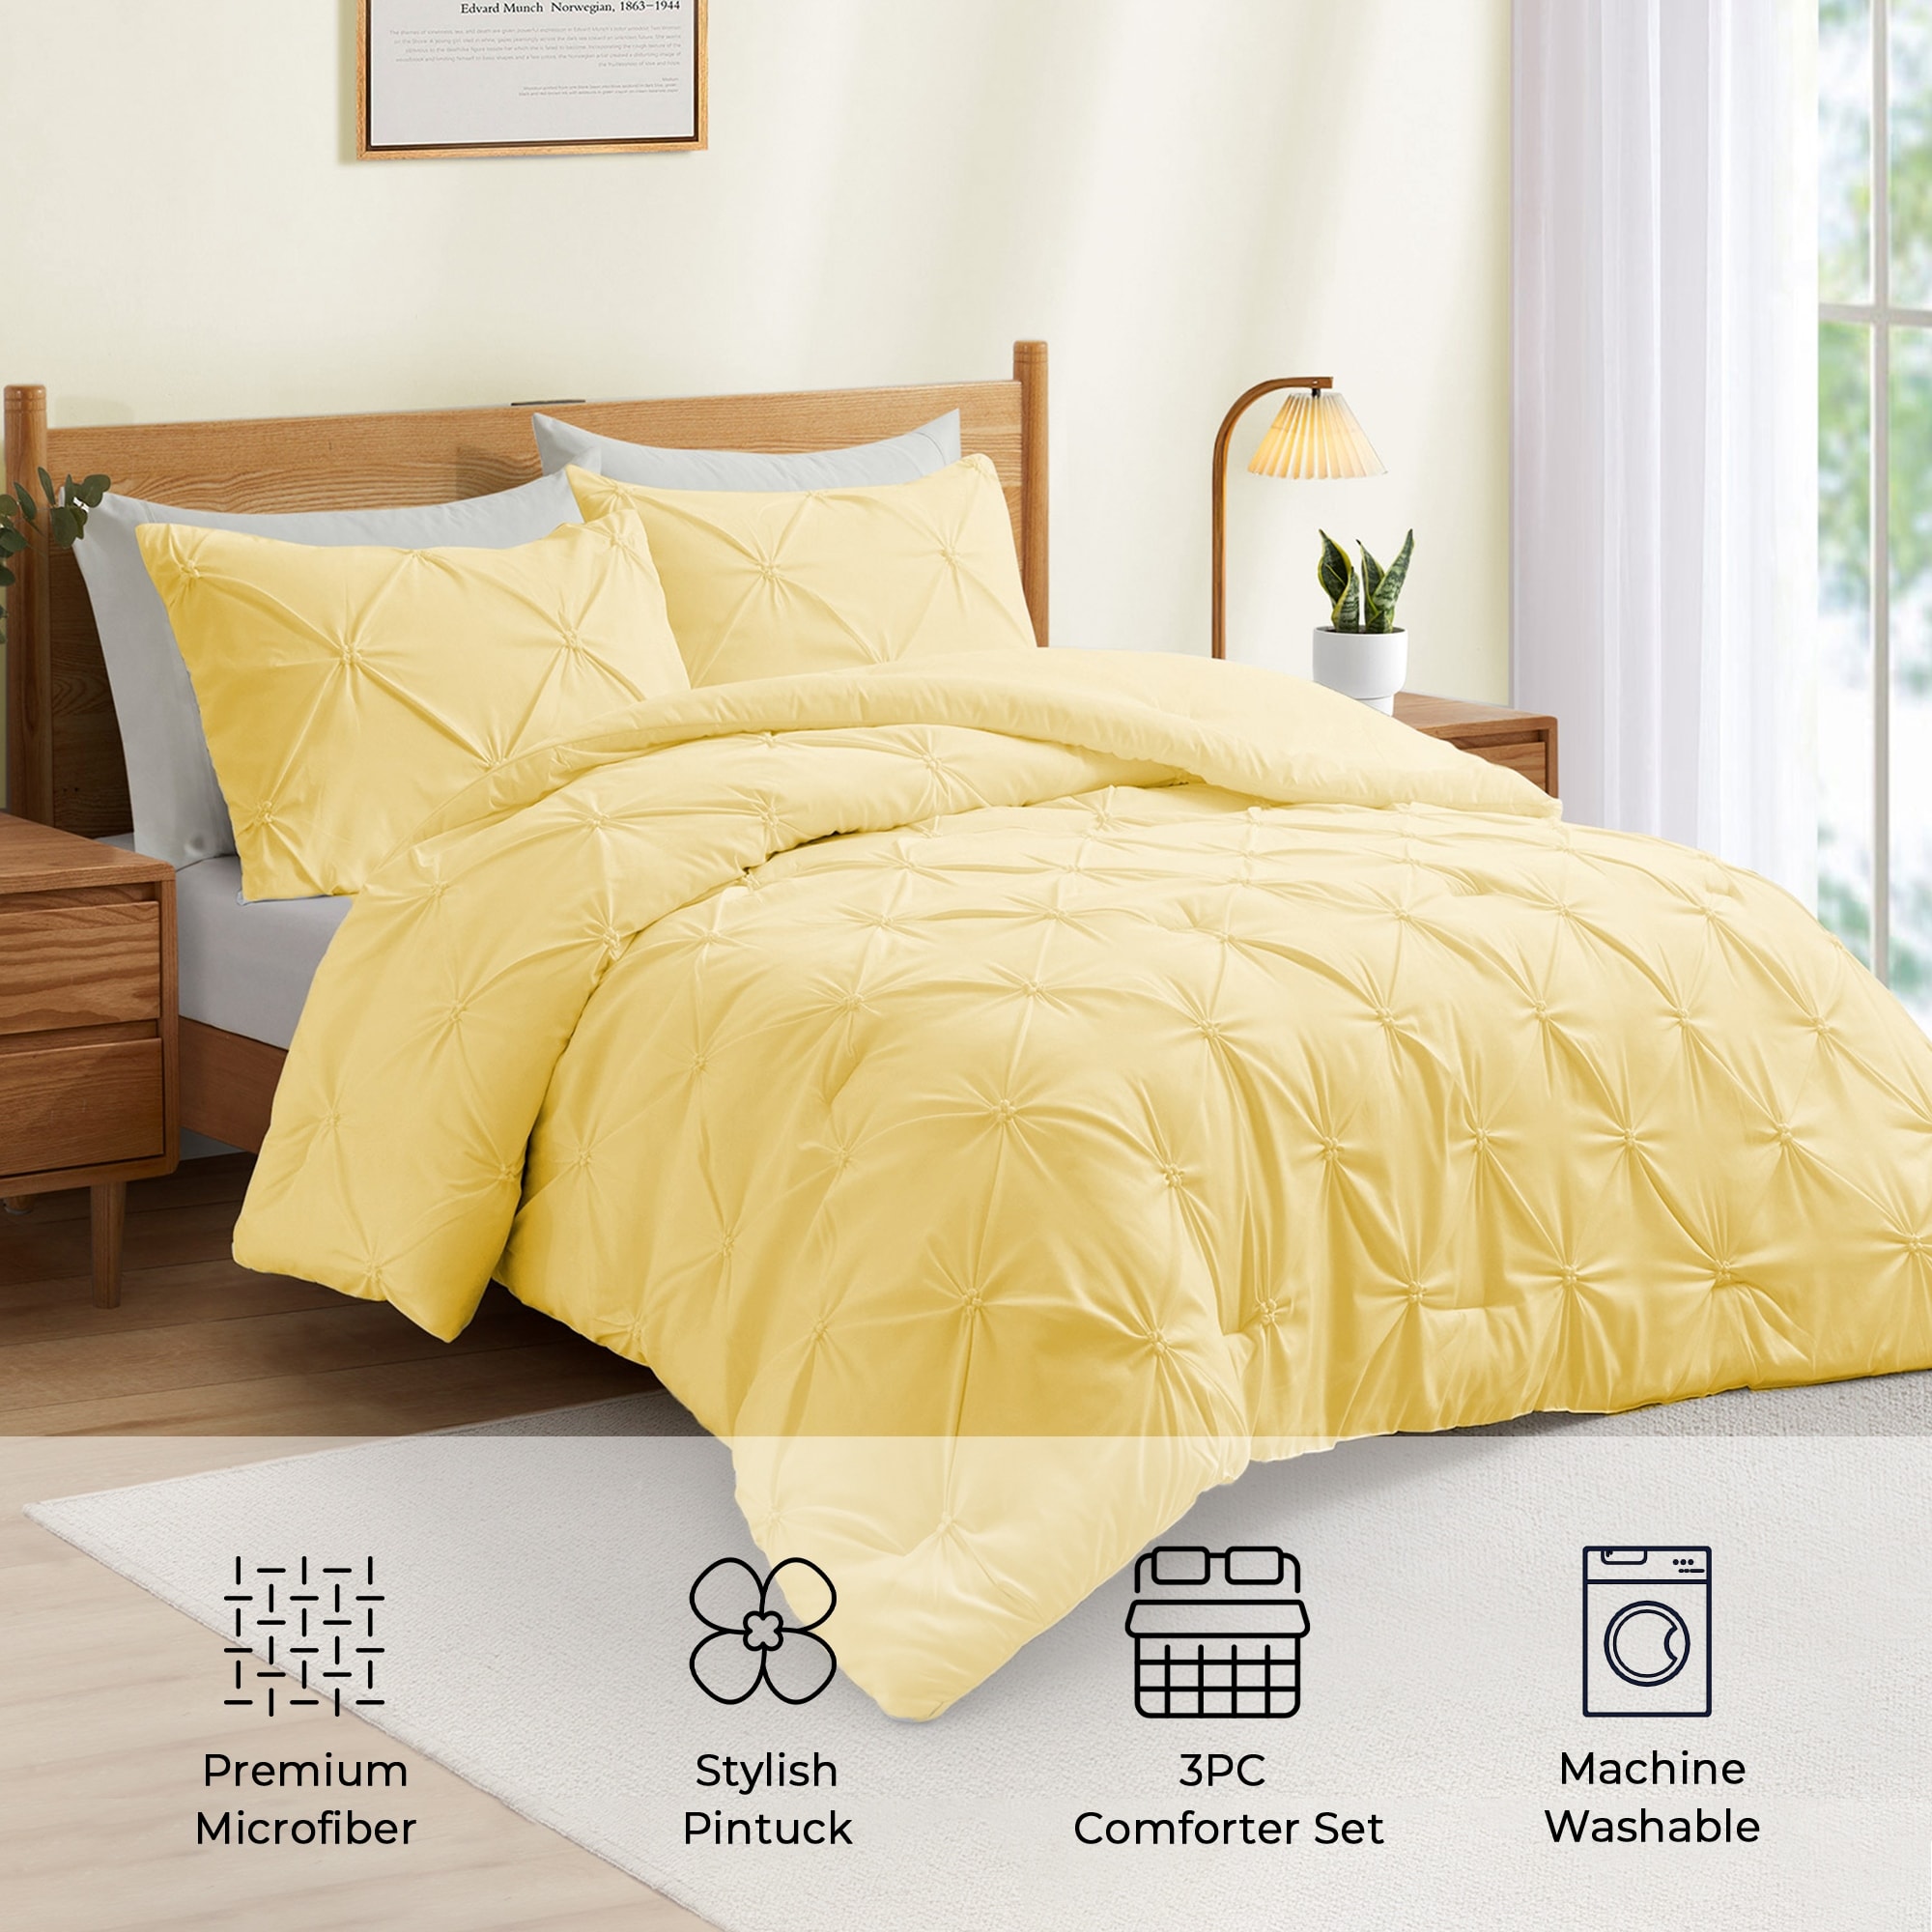 https://ak1.ostkcdn.com/images/products/is/images/direct/bb81de0ab7ebb2f6d933d64b5e511f2a881f4cb0/3-Piece-Pintuck-Pinch-Pleat-Comforter-Set%2C-Yellow.jpg